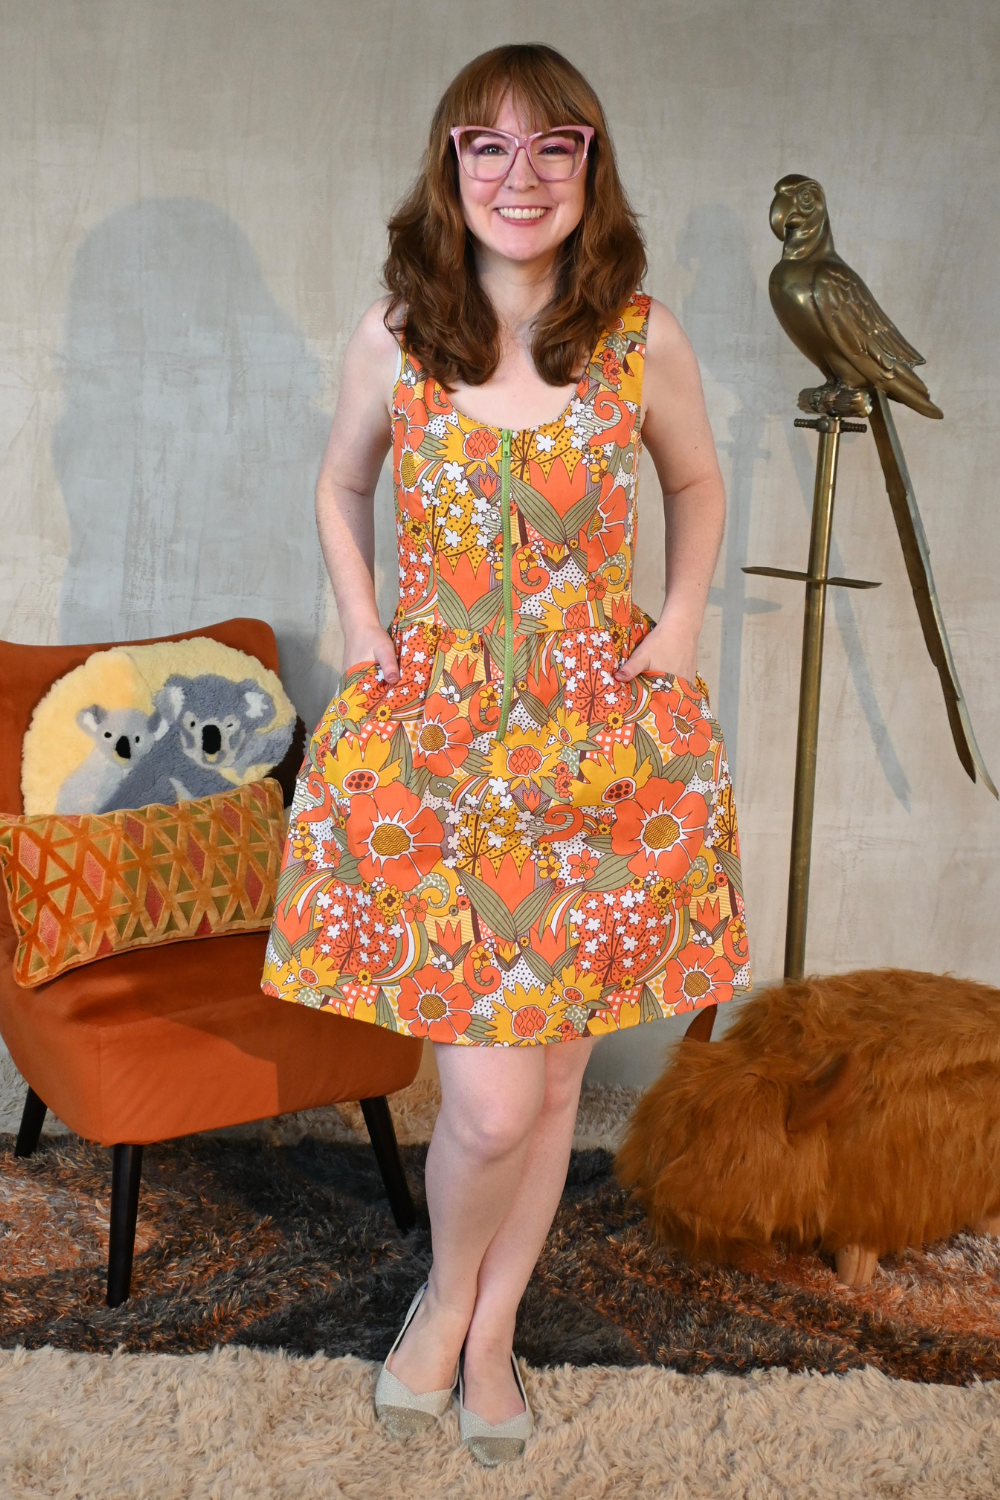 Brown-haired model with glasses wearing fit & flare knee-length floral dress in orange, green and yellow